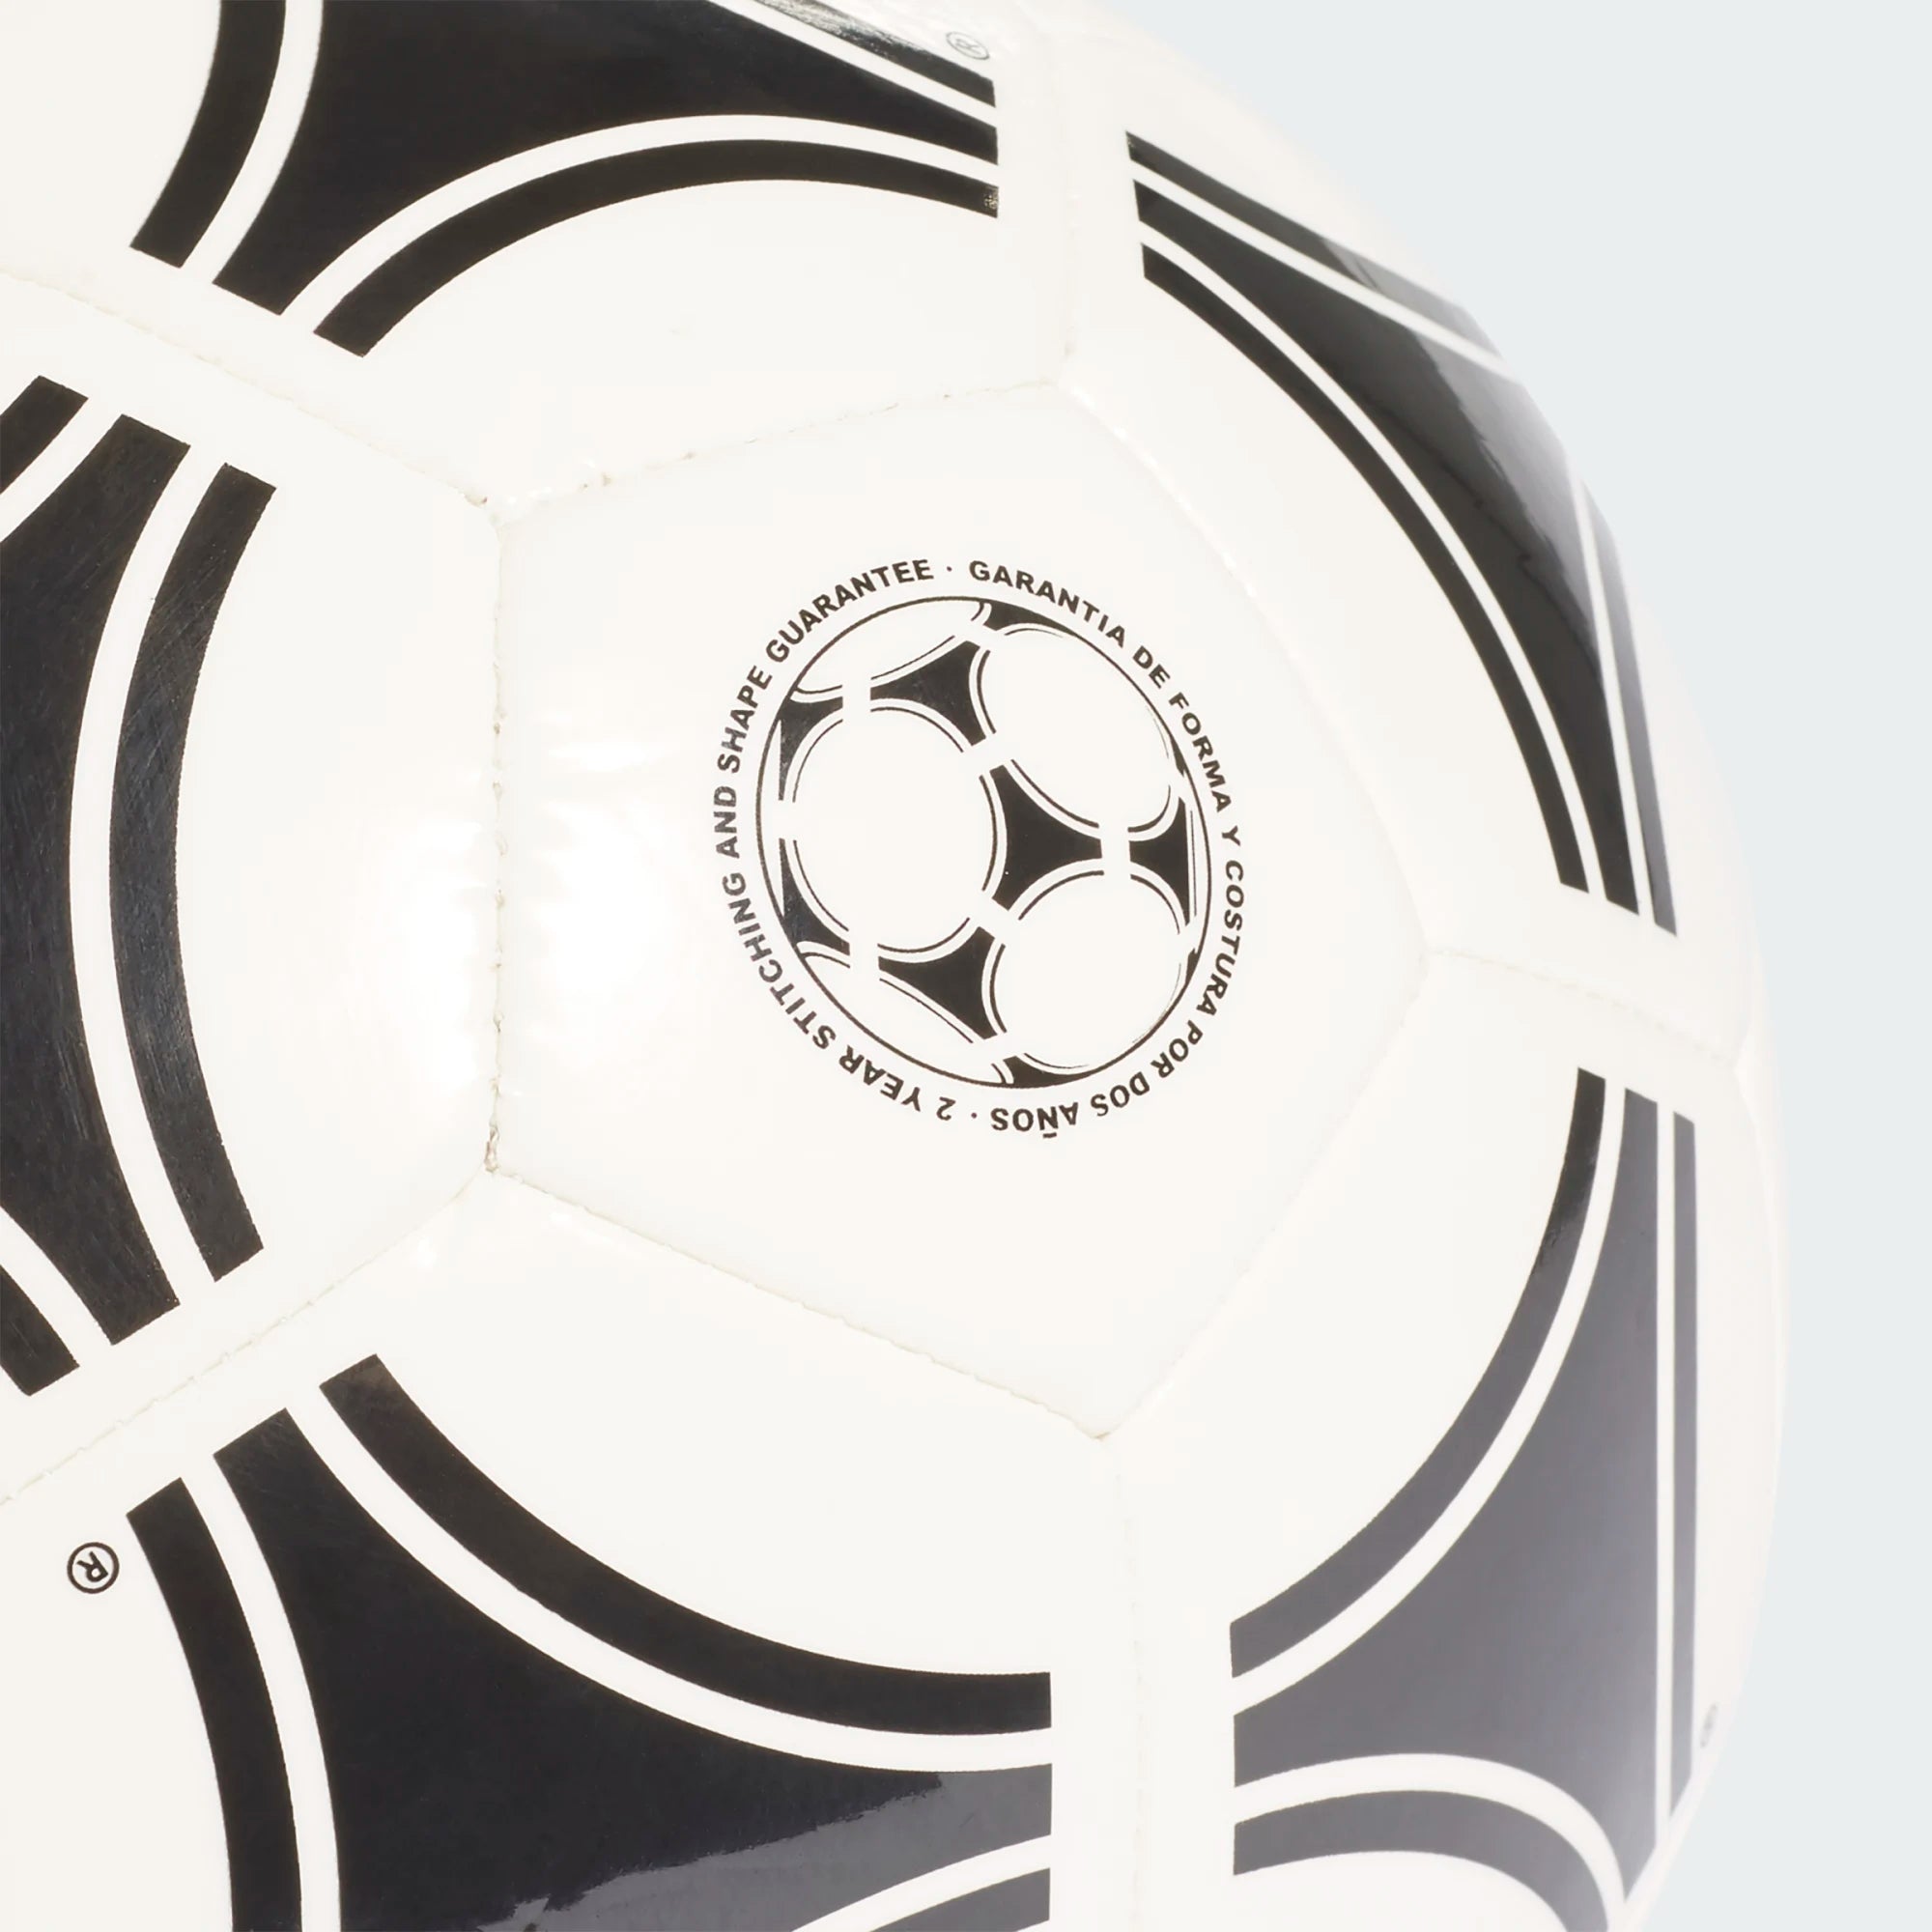 Adidas Tango Glider Soccer Ball-Adidas-Sports Replay - Sports Excellence